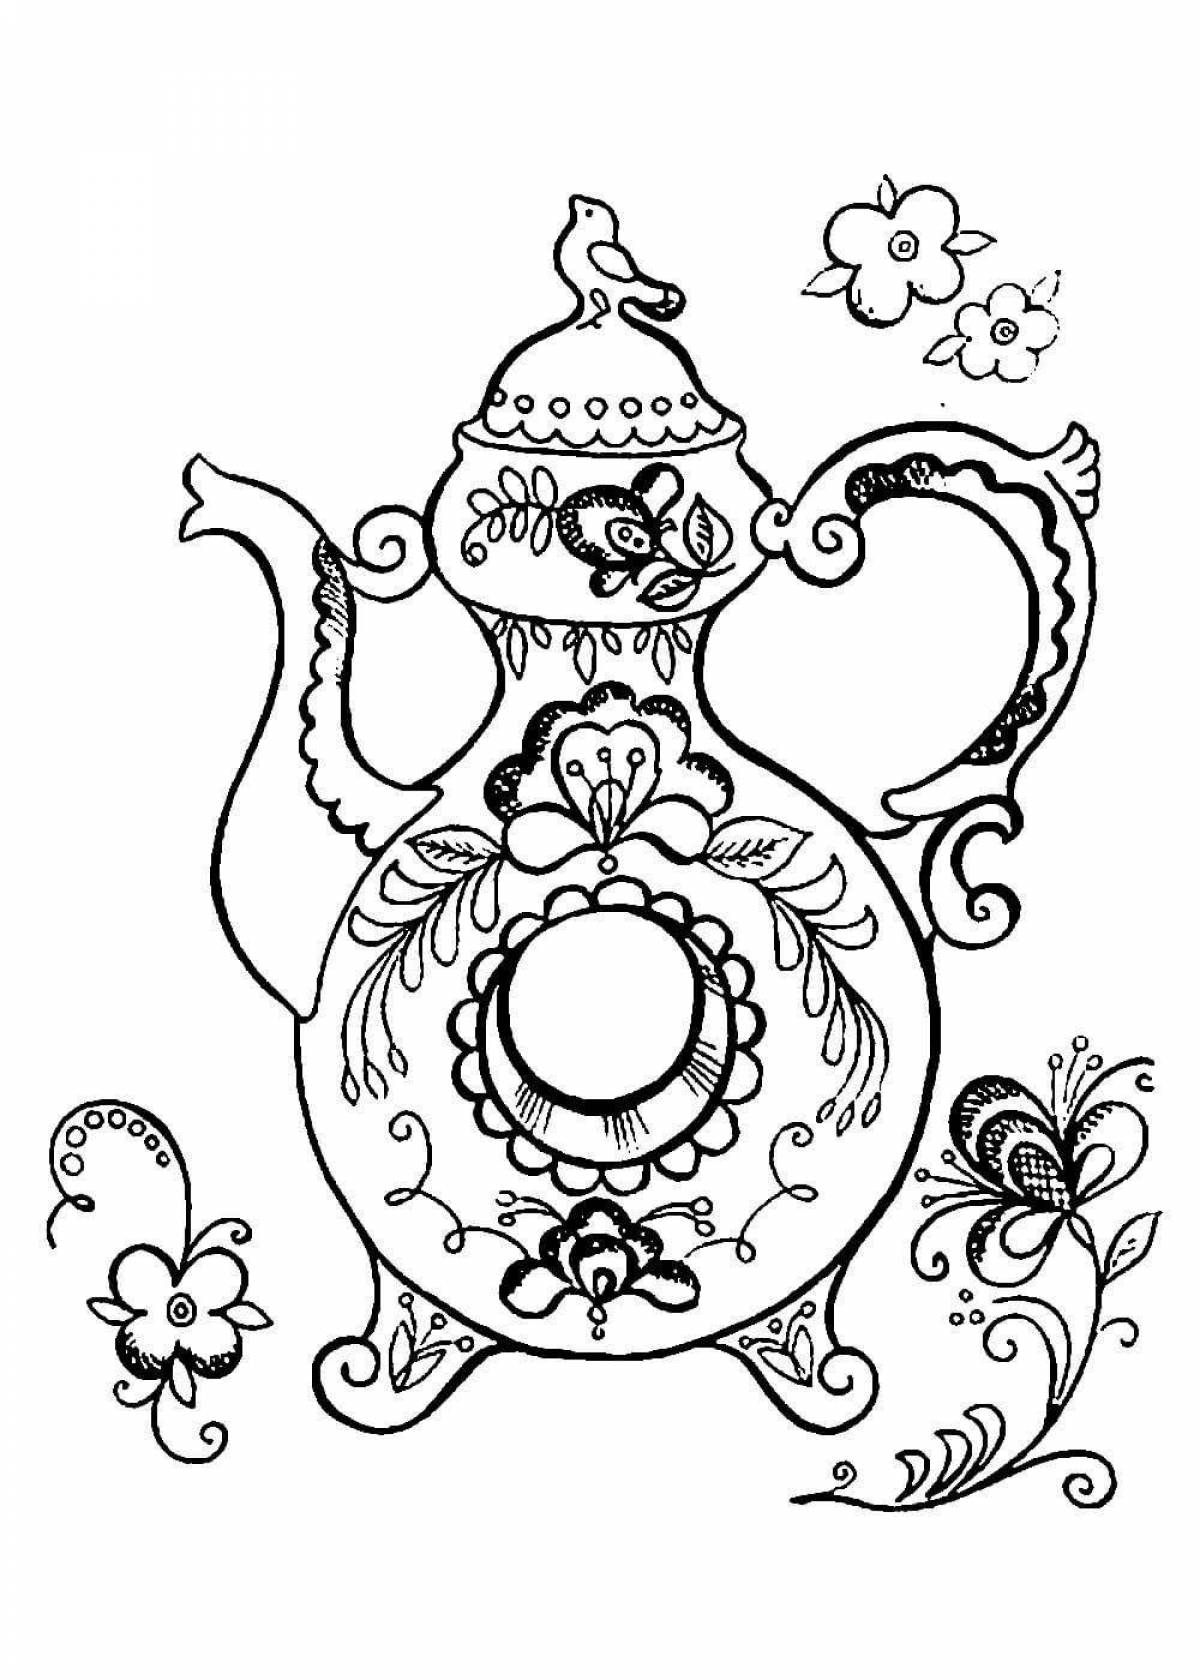 Exquisite Gzhel coloring book for kids